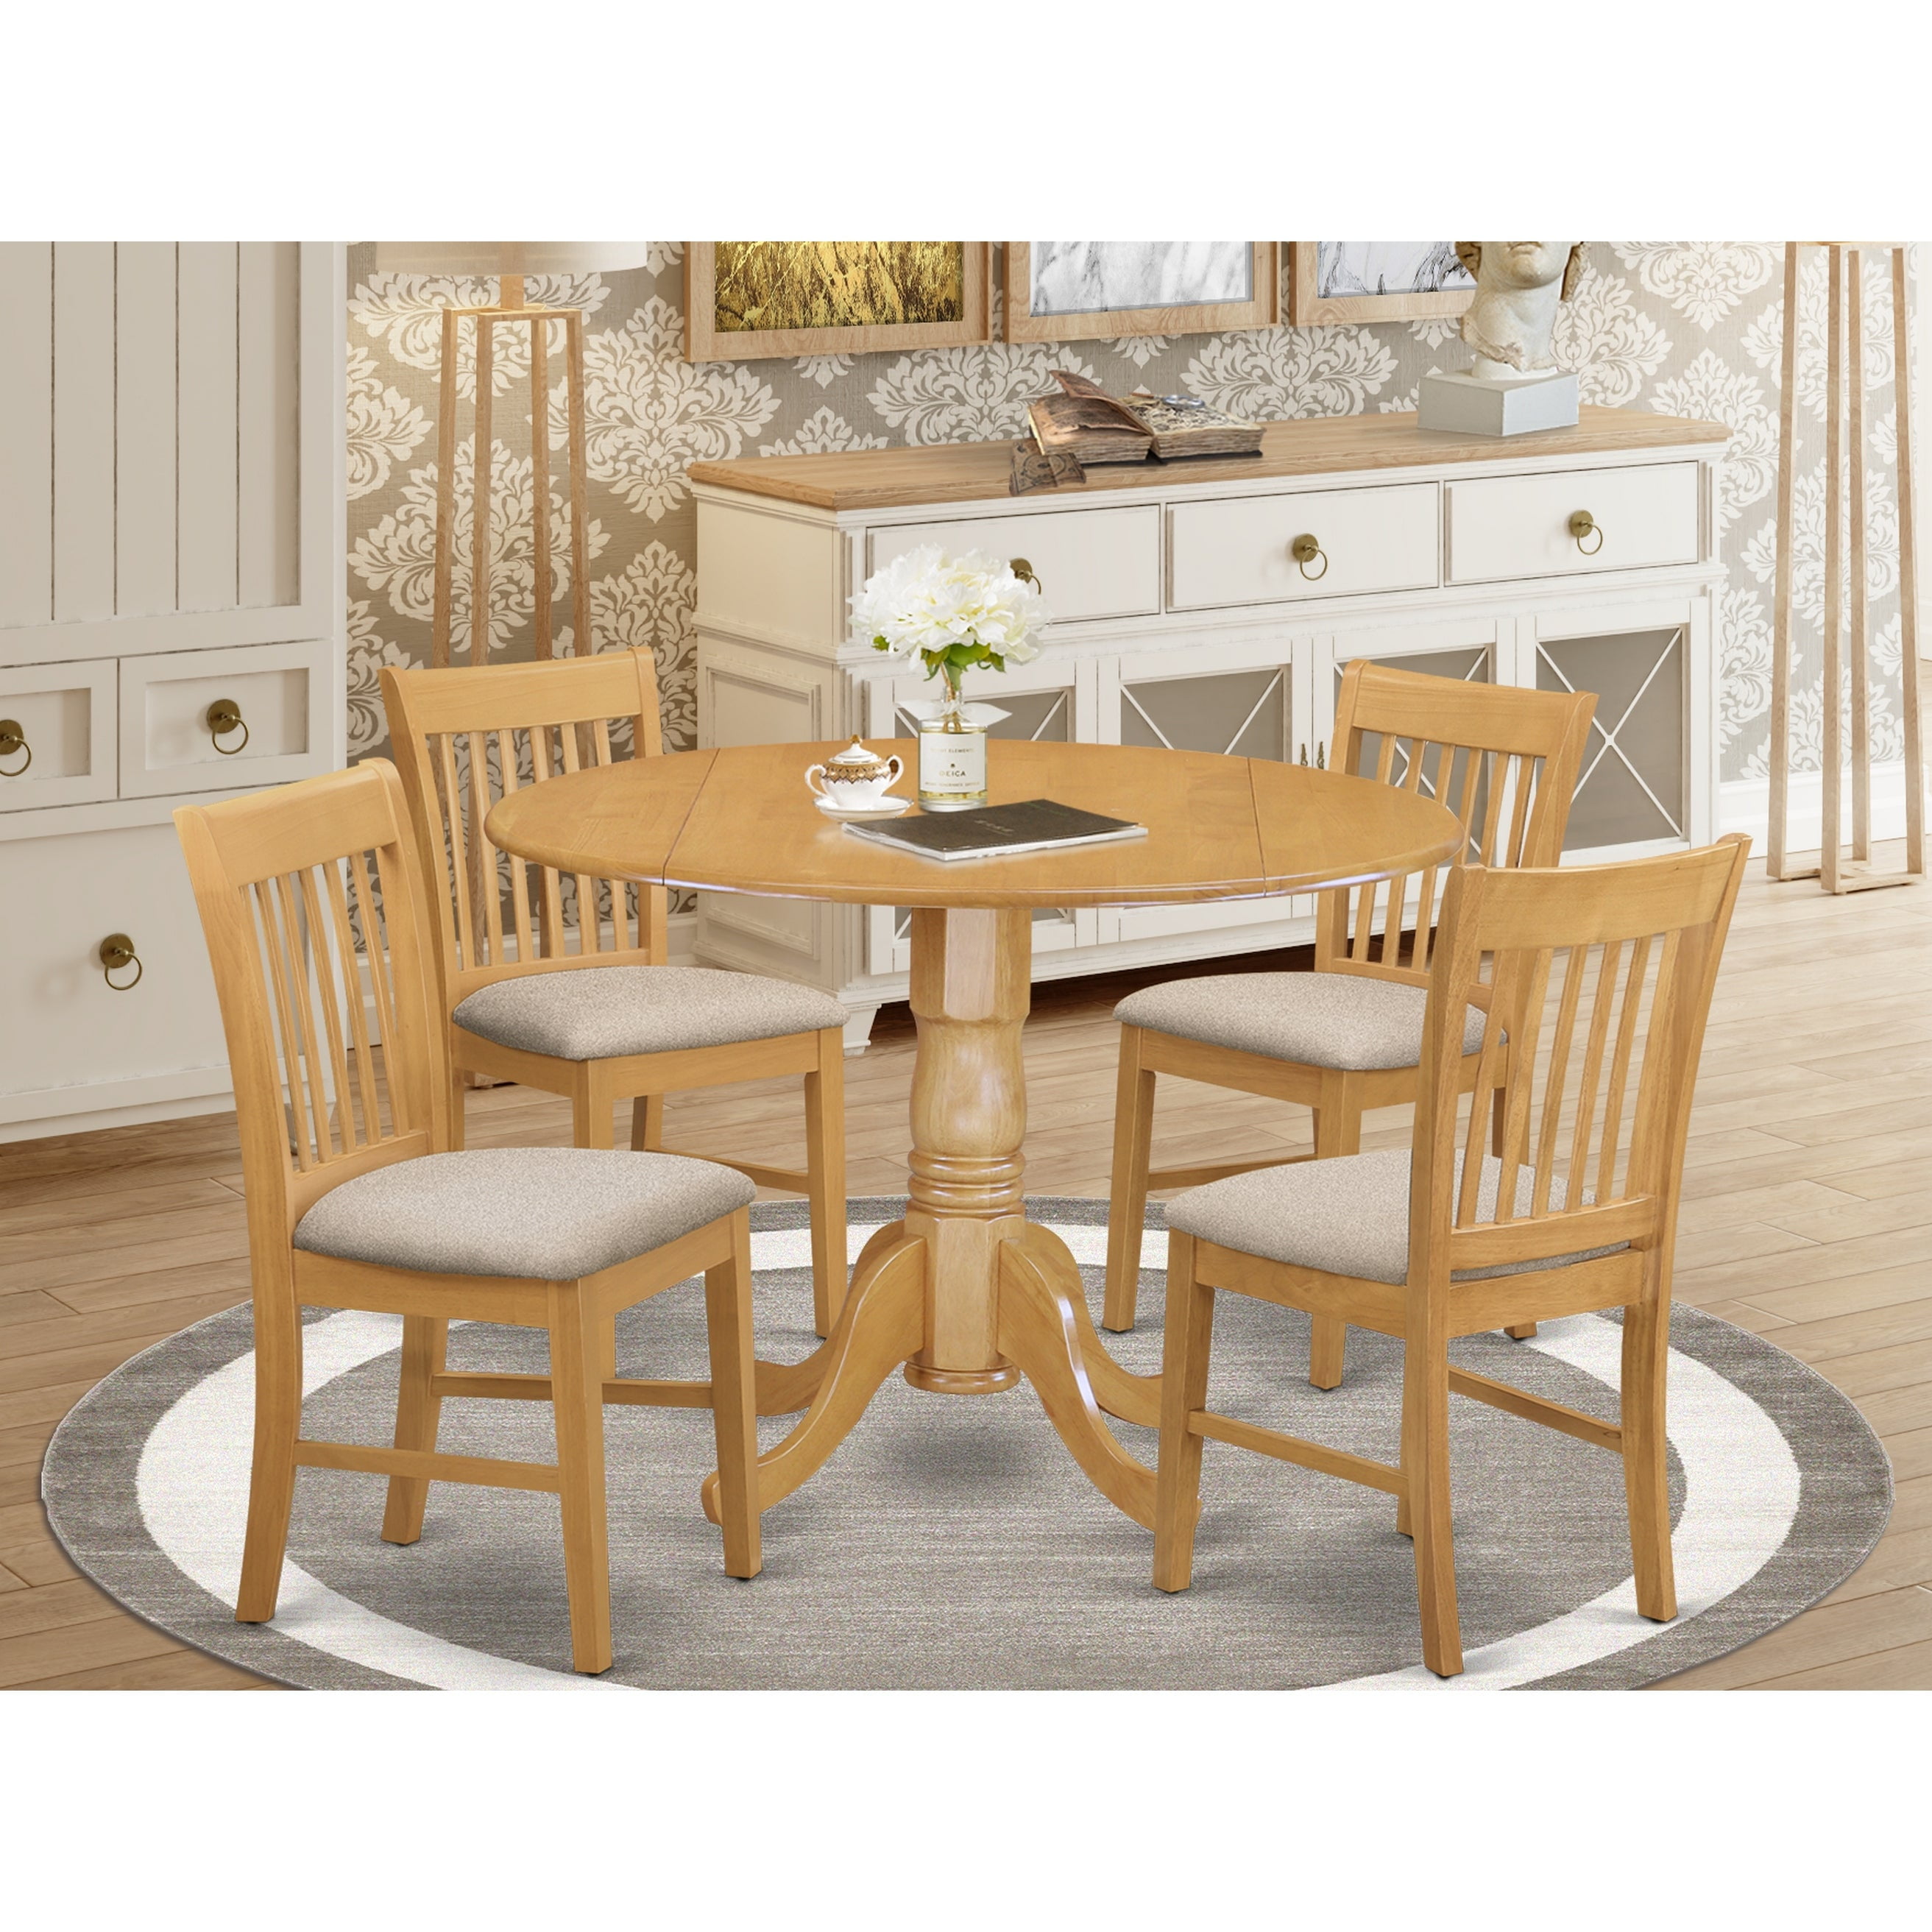 DLNO5-OAK-C 5 Pc small Kitchen Table set-round Kitchen Table and 4